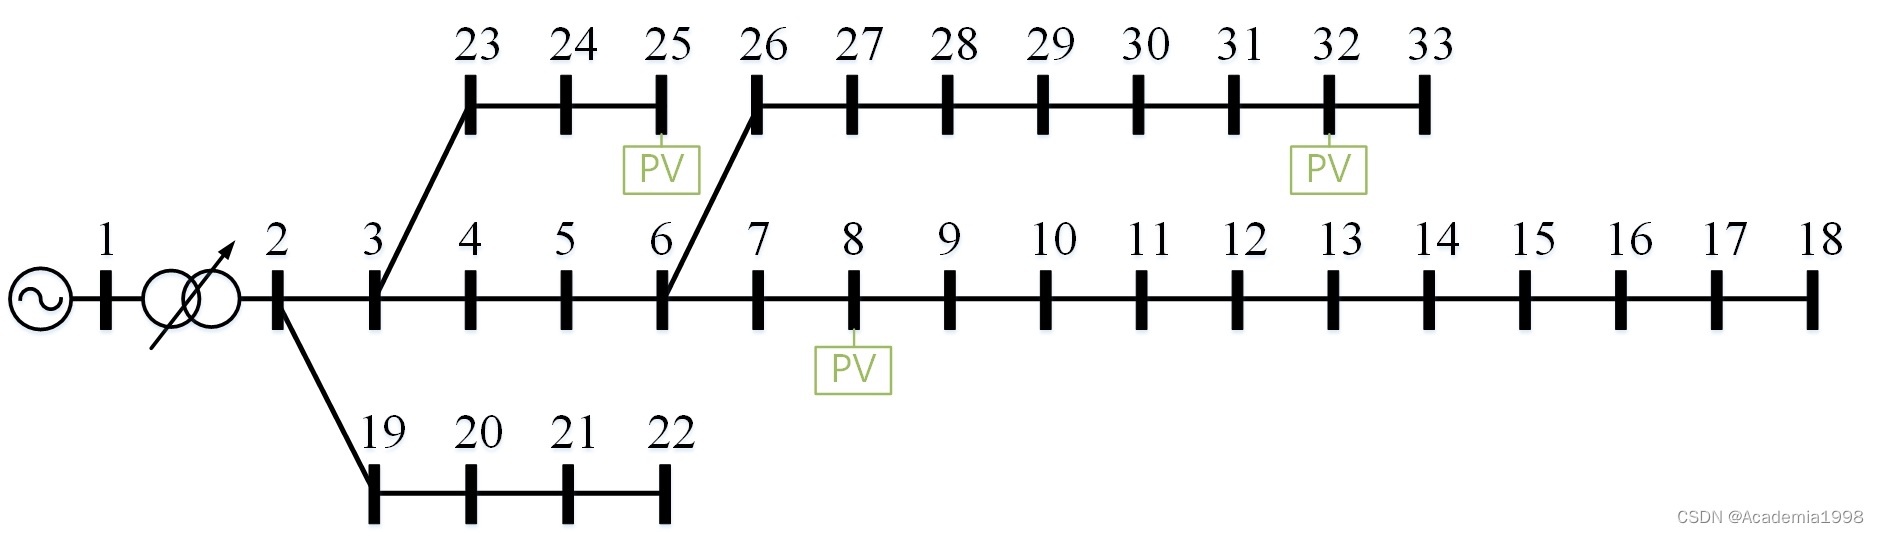 Figure 3: Topology of revised IEEE 33-bus distribution system